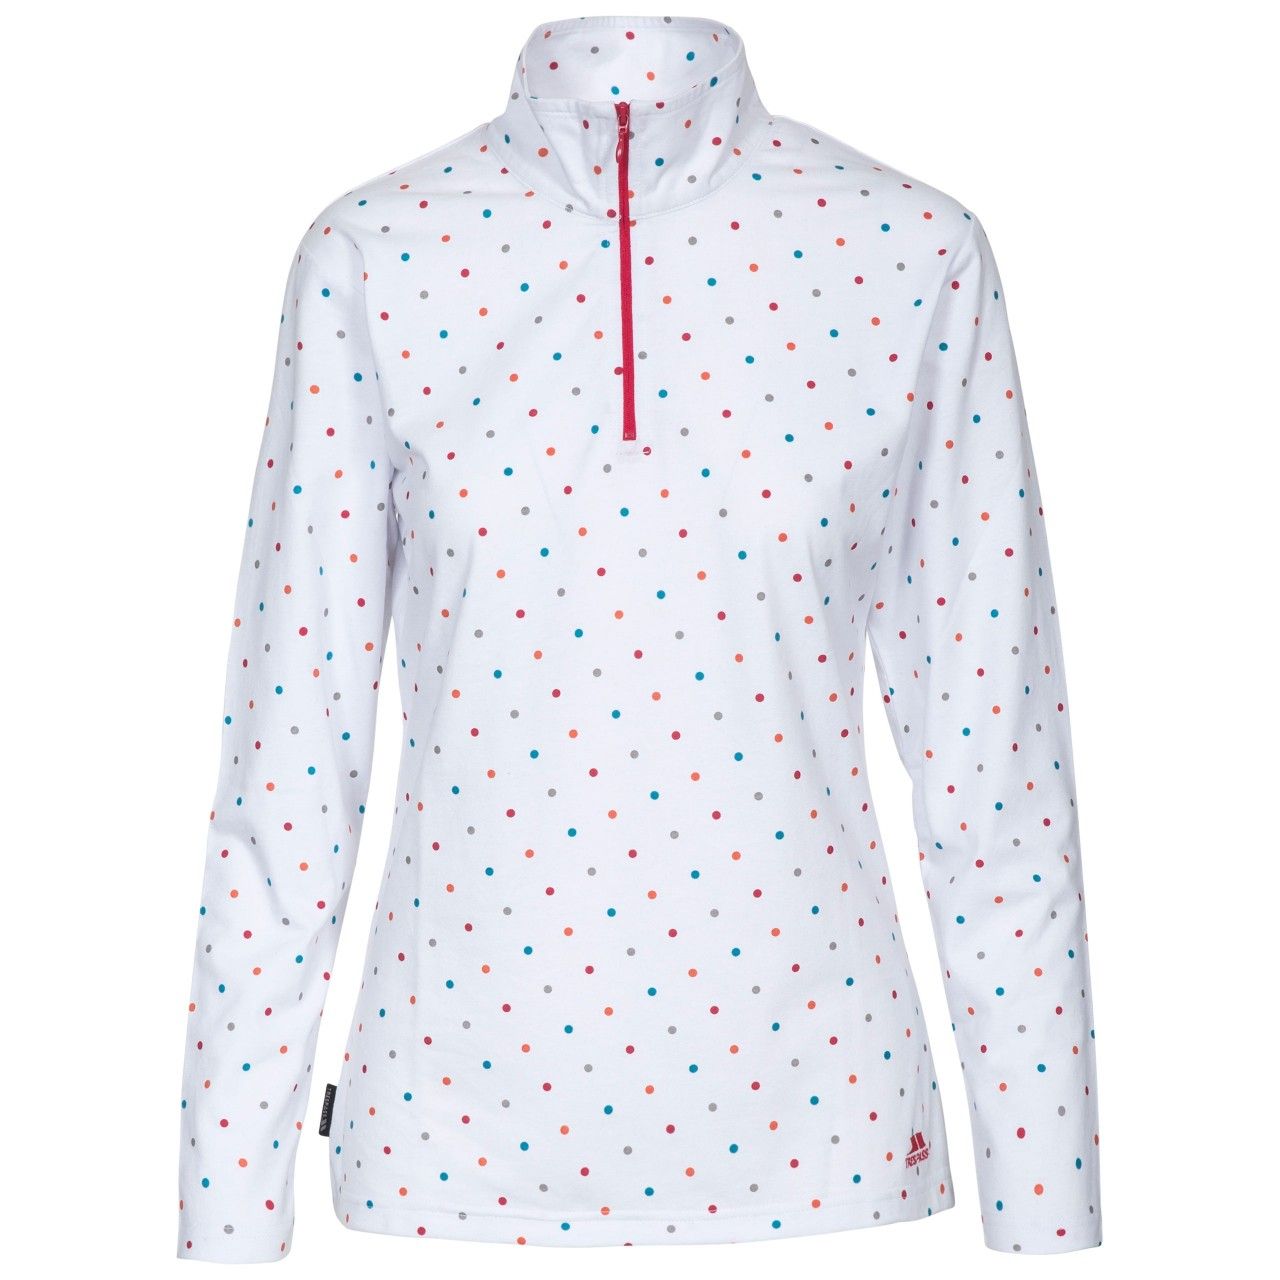 Zip Neck. Long Sleeve. All Over Print. Contrast Zip & Embroidery. Material: 60% Cotton 40% Polyester. Trespass Womens Chest Sizing (approx): XS/8 - 32in/81cm, S/10 - 34in/86cm, M/12 - 36in/91.4cm, L/14 - 38in/96.5cm, XL/16 - 40in/101.5cm, XXL/18 - 42in/106.5cm.